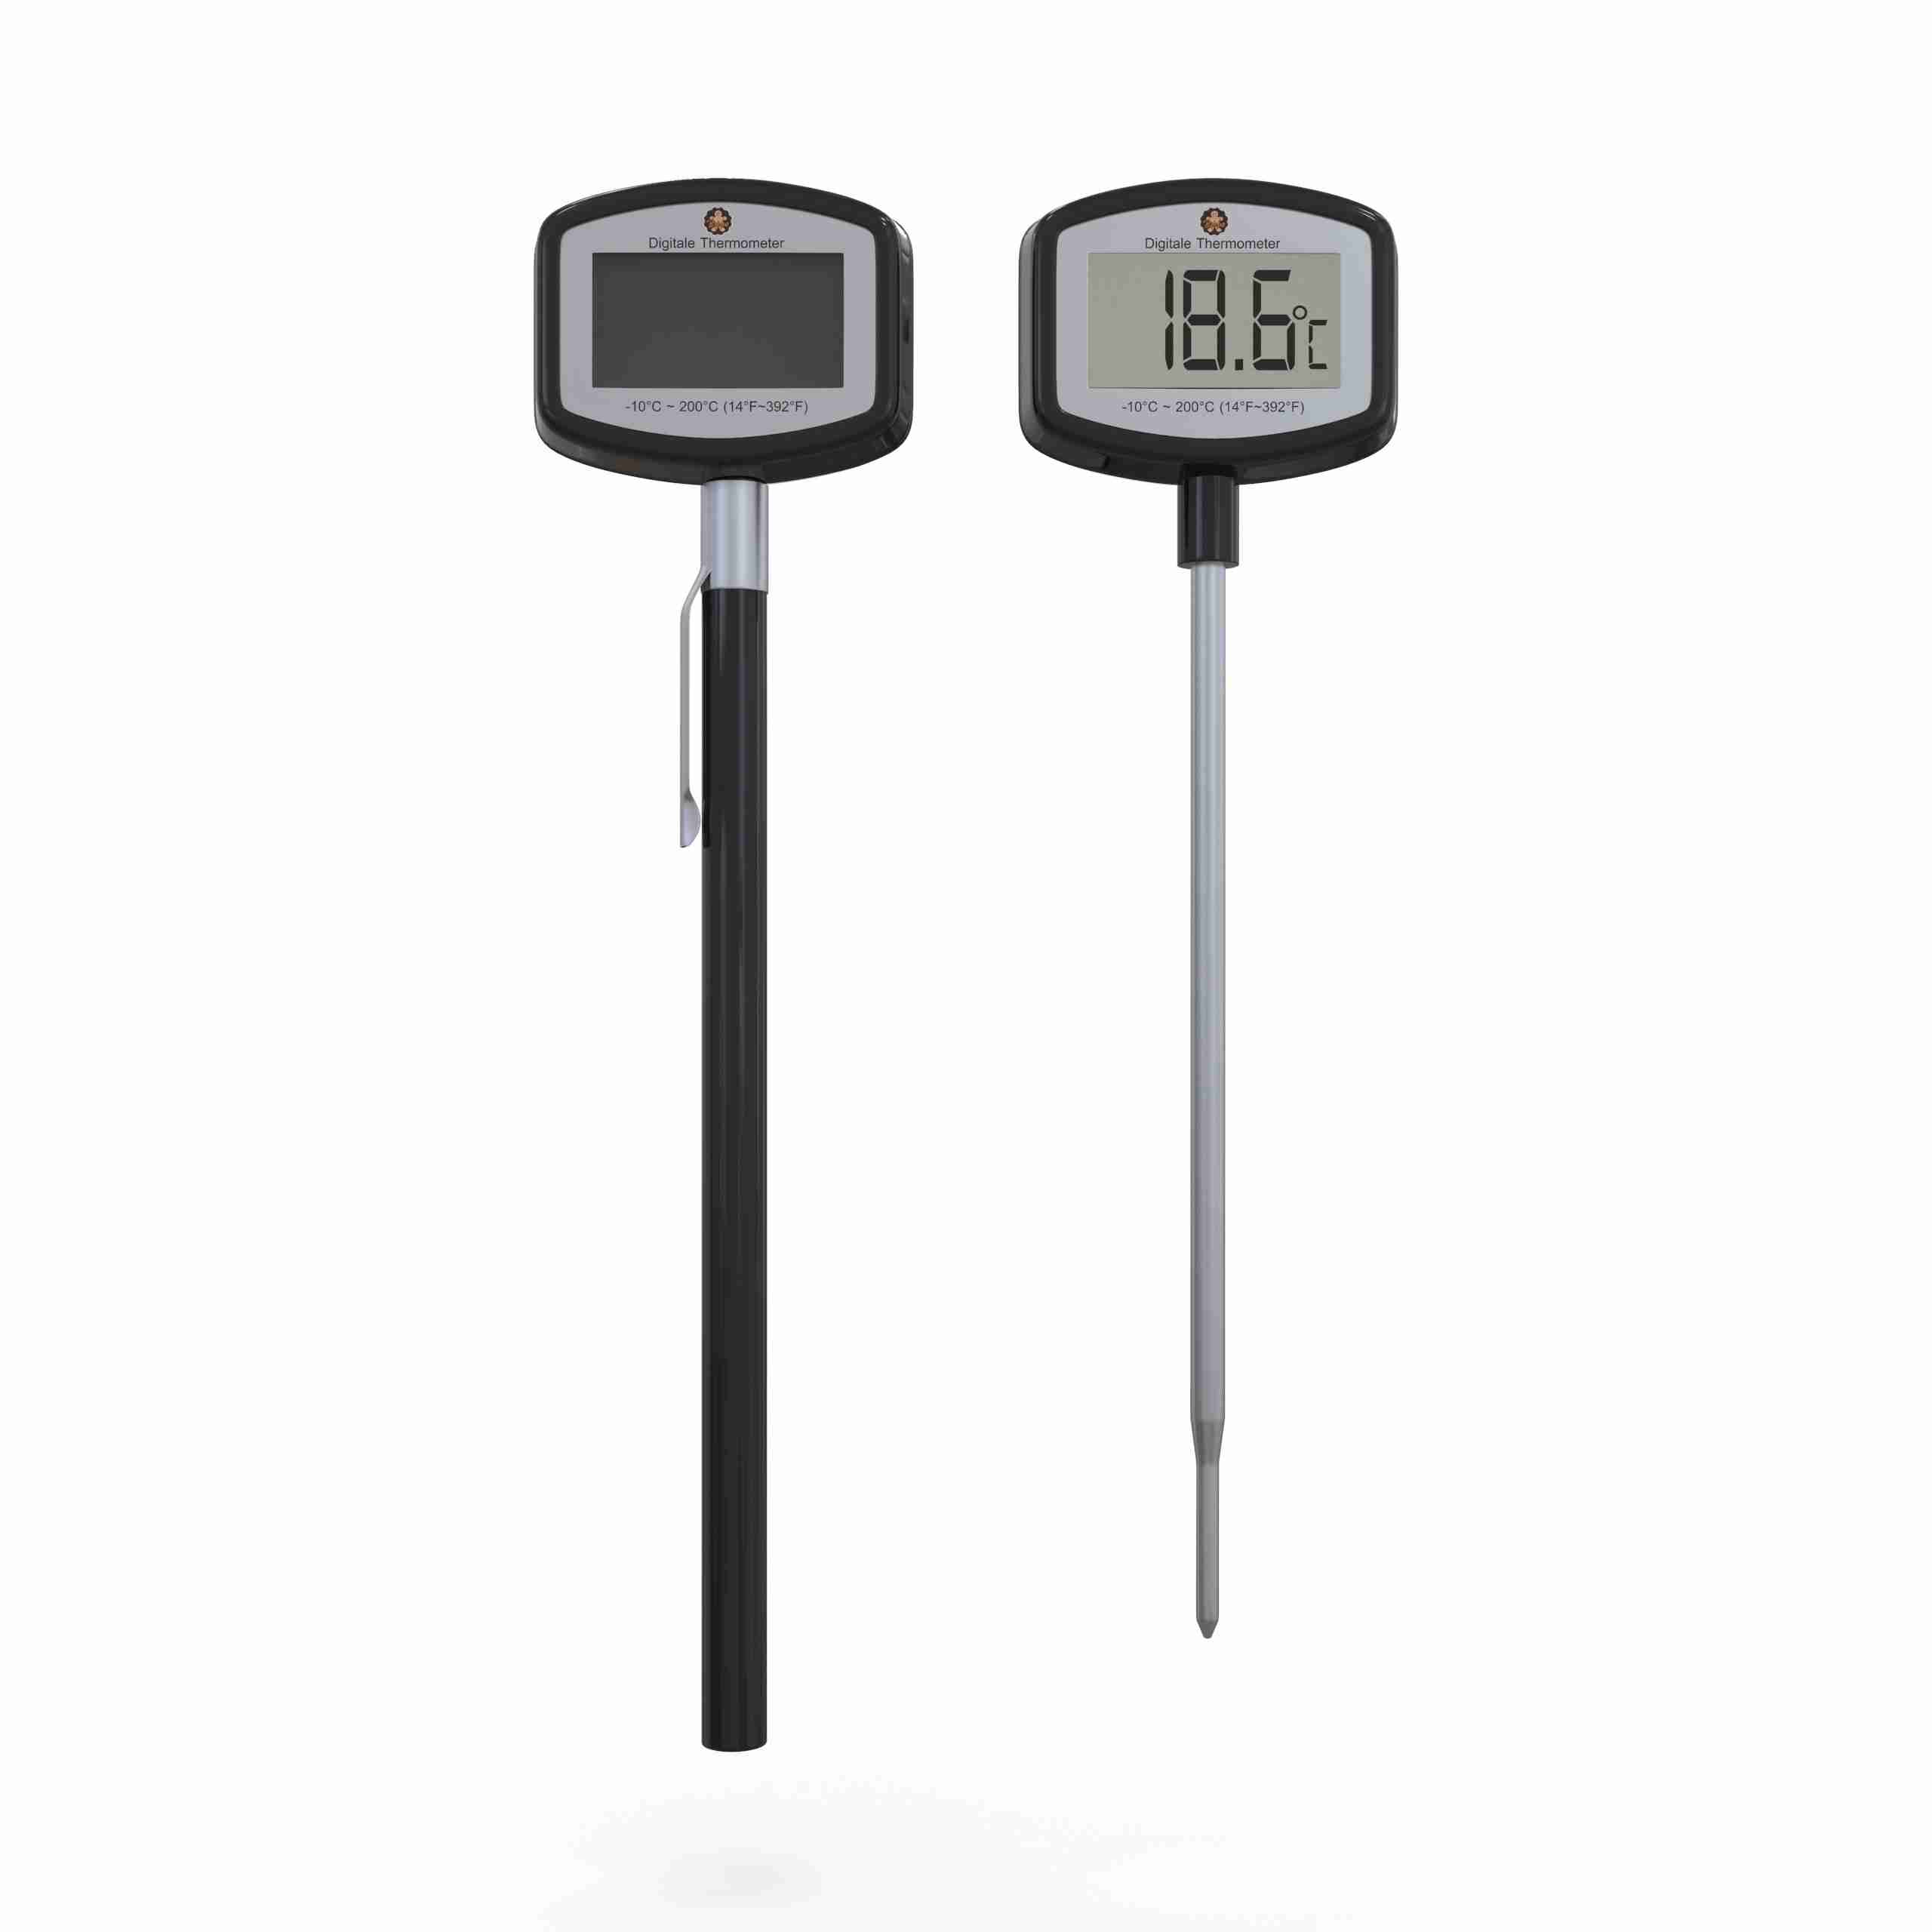 Weber 6492 Instant Read Thermometer Review